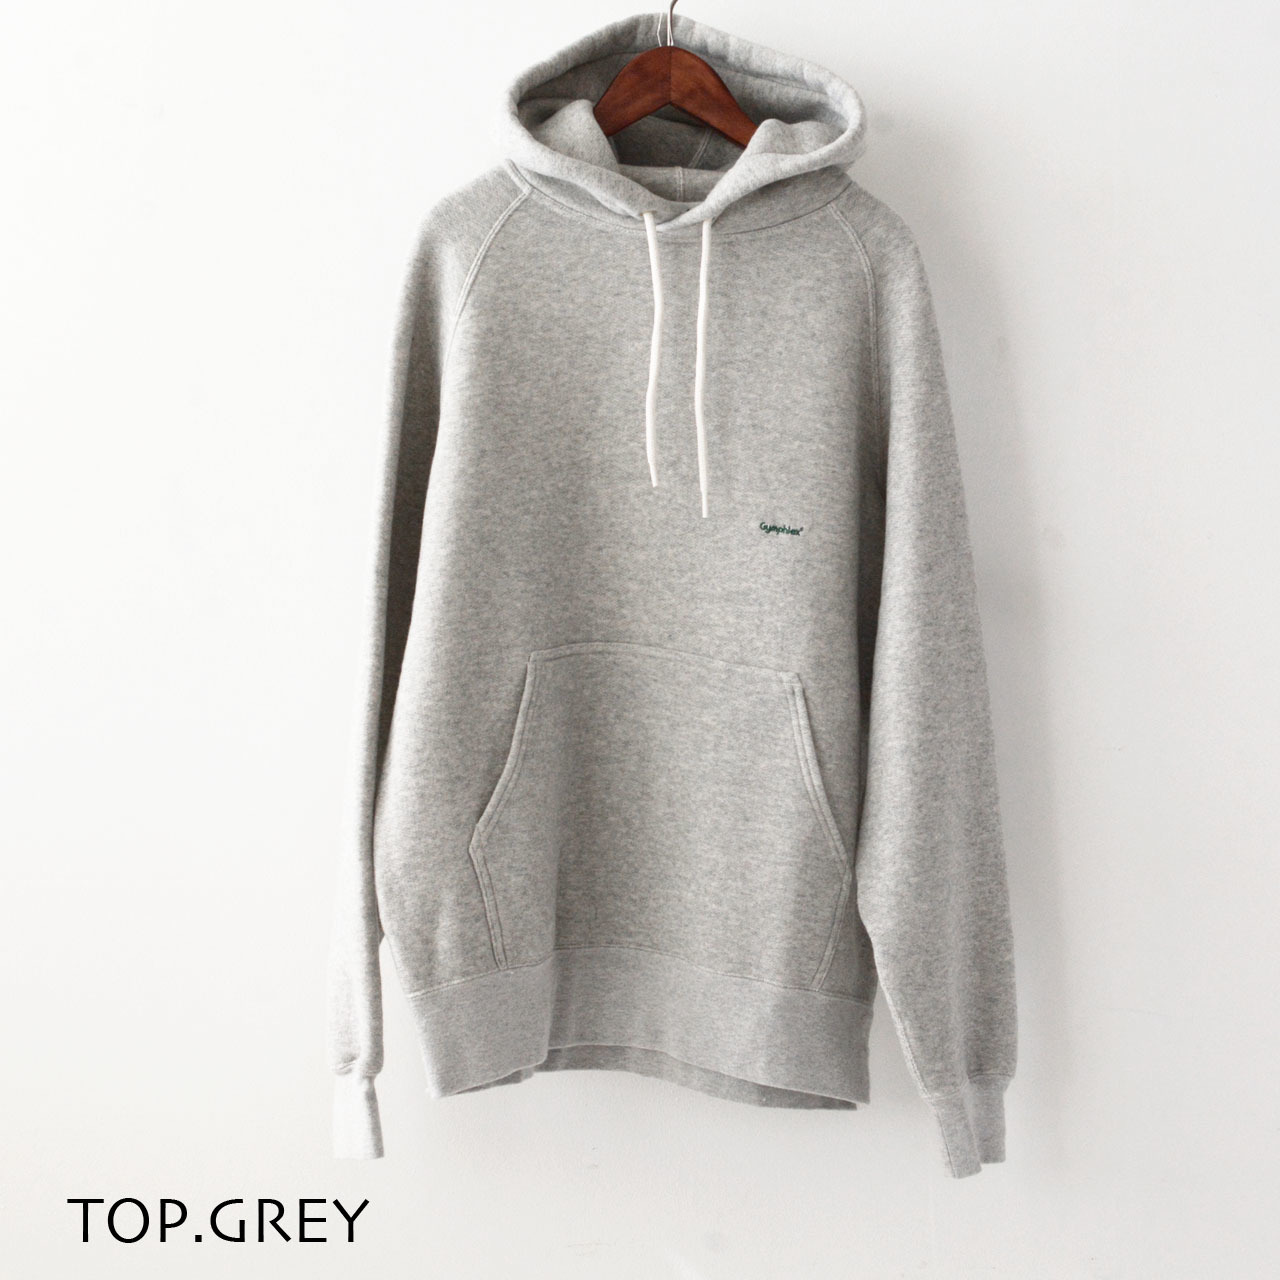 Gymphlex [ジムフレックス] SWING SLEEVE PULLOVER HOODIE [GY-C0002 ARB]_f0051306_13480063.jpg